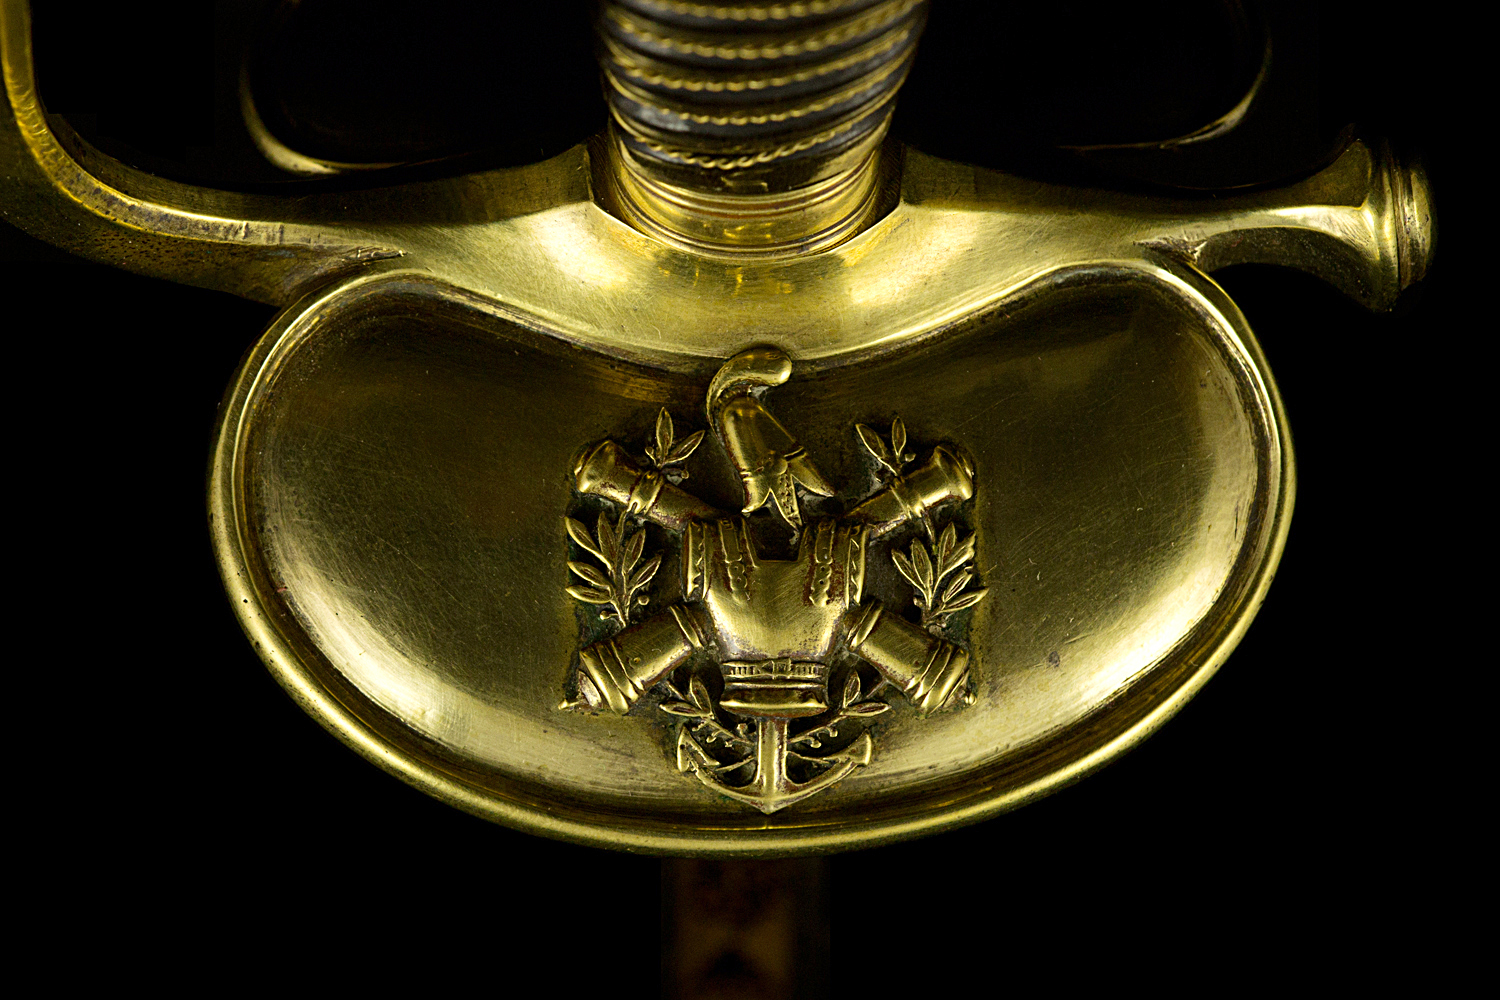 S000039_French_Polytechnique_Smallsword_Detail_Shell_Obverse